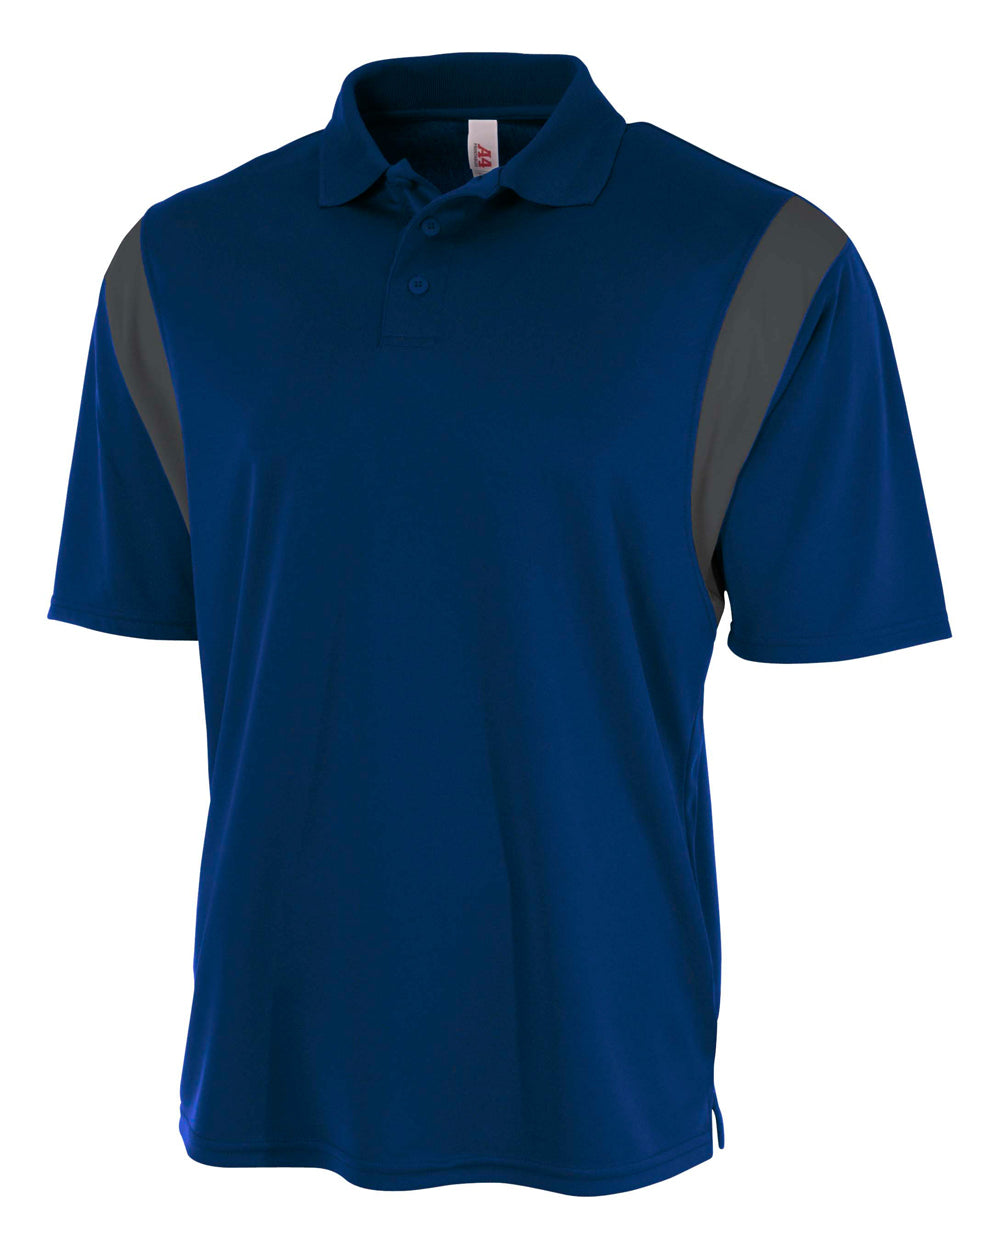 Navy/graphite A4 Color Block Polo With Knit Color